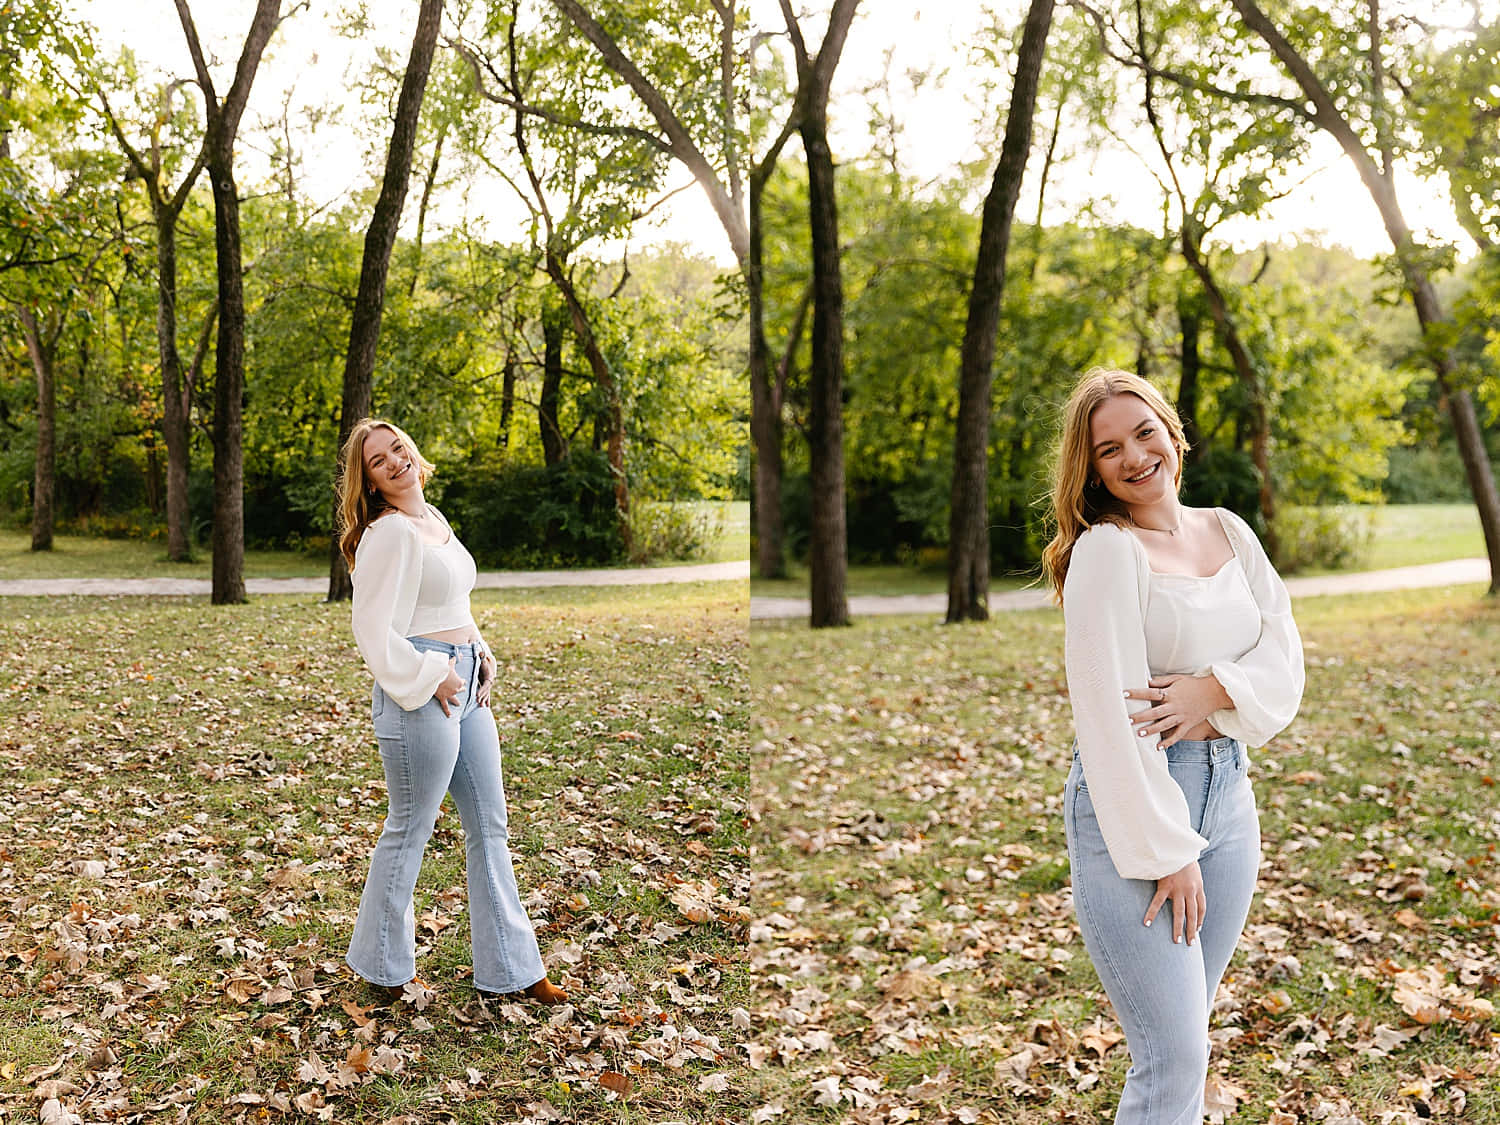 A Girl In A White Blouse And Jeans Standing In The Woods